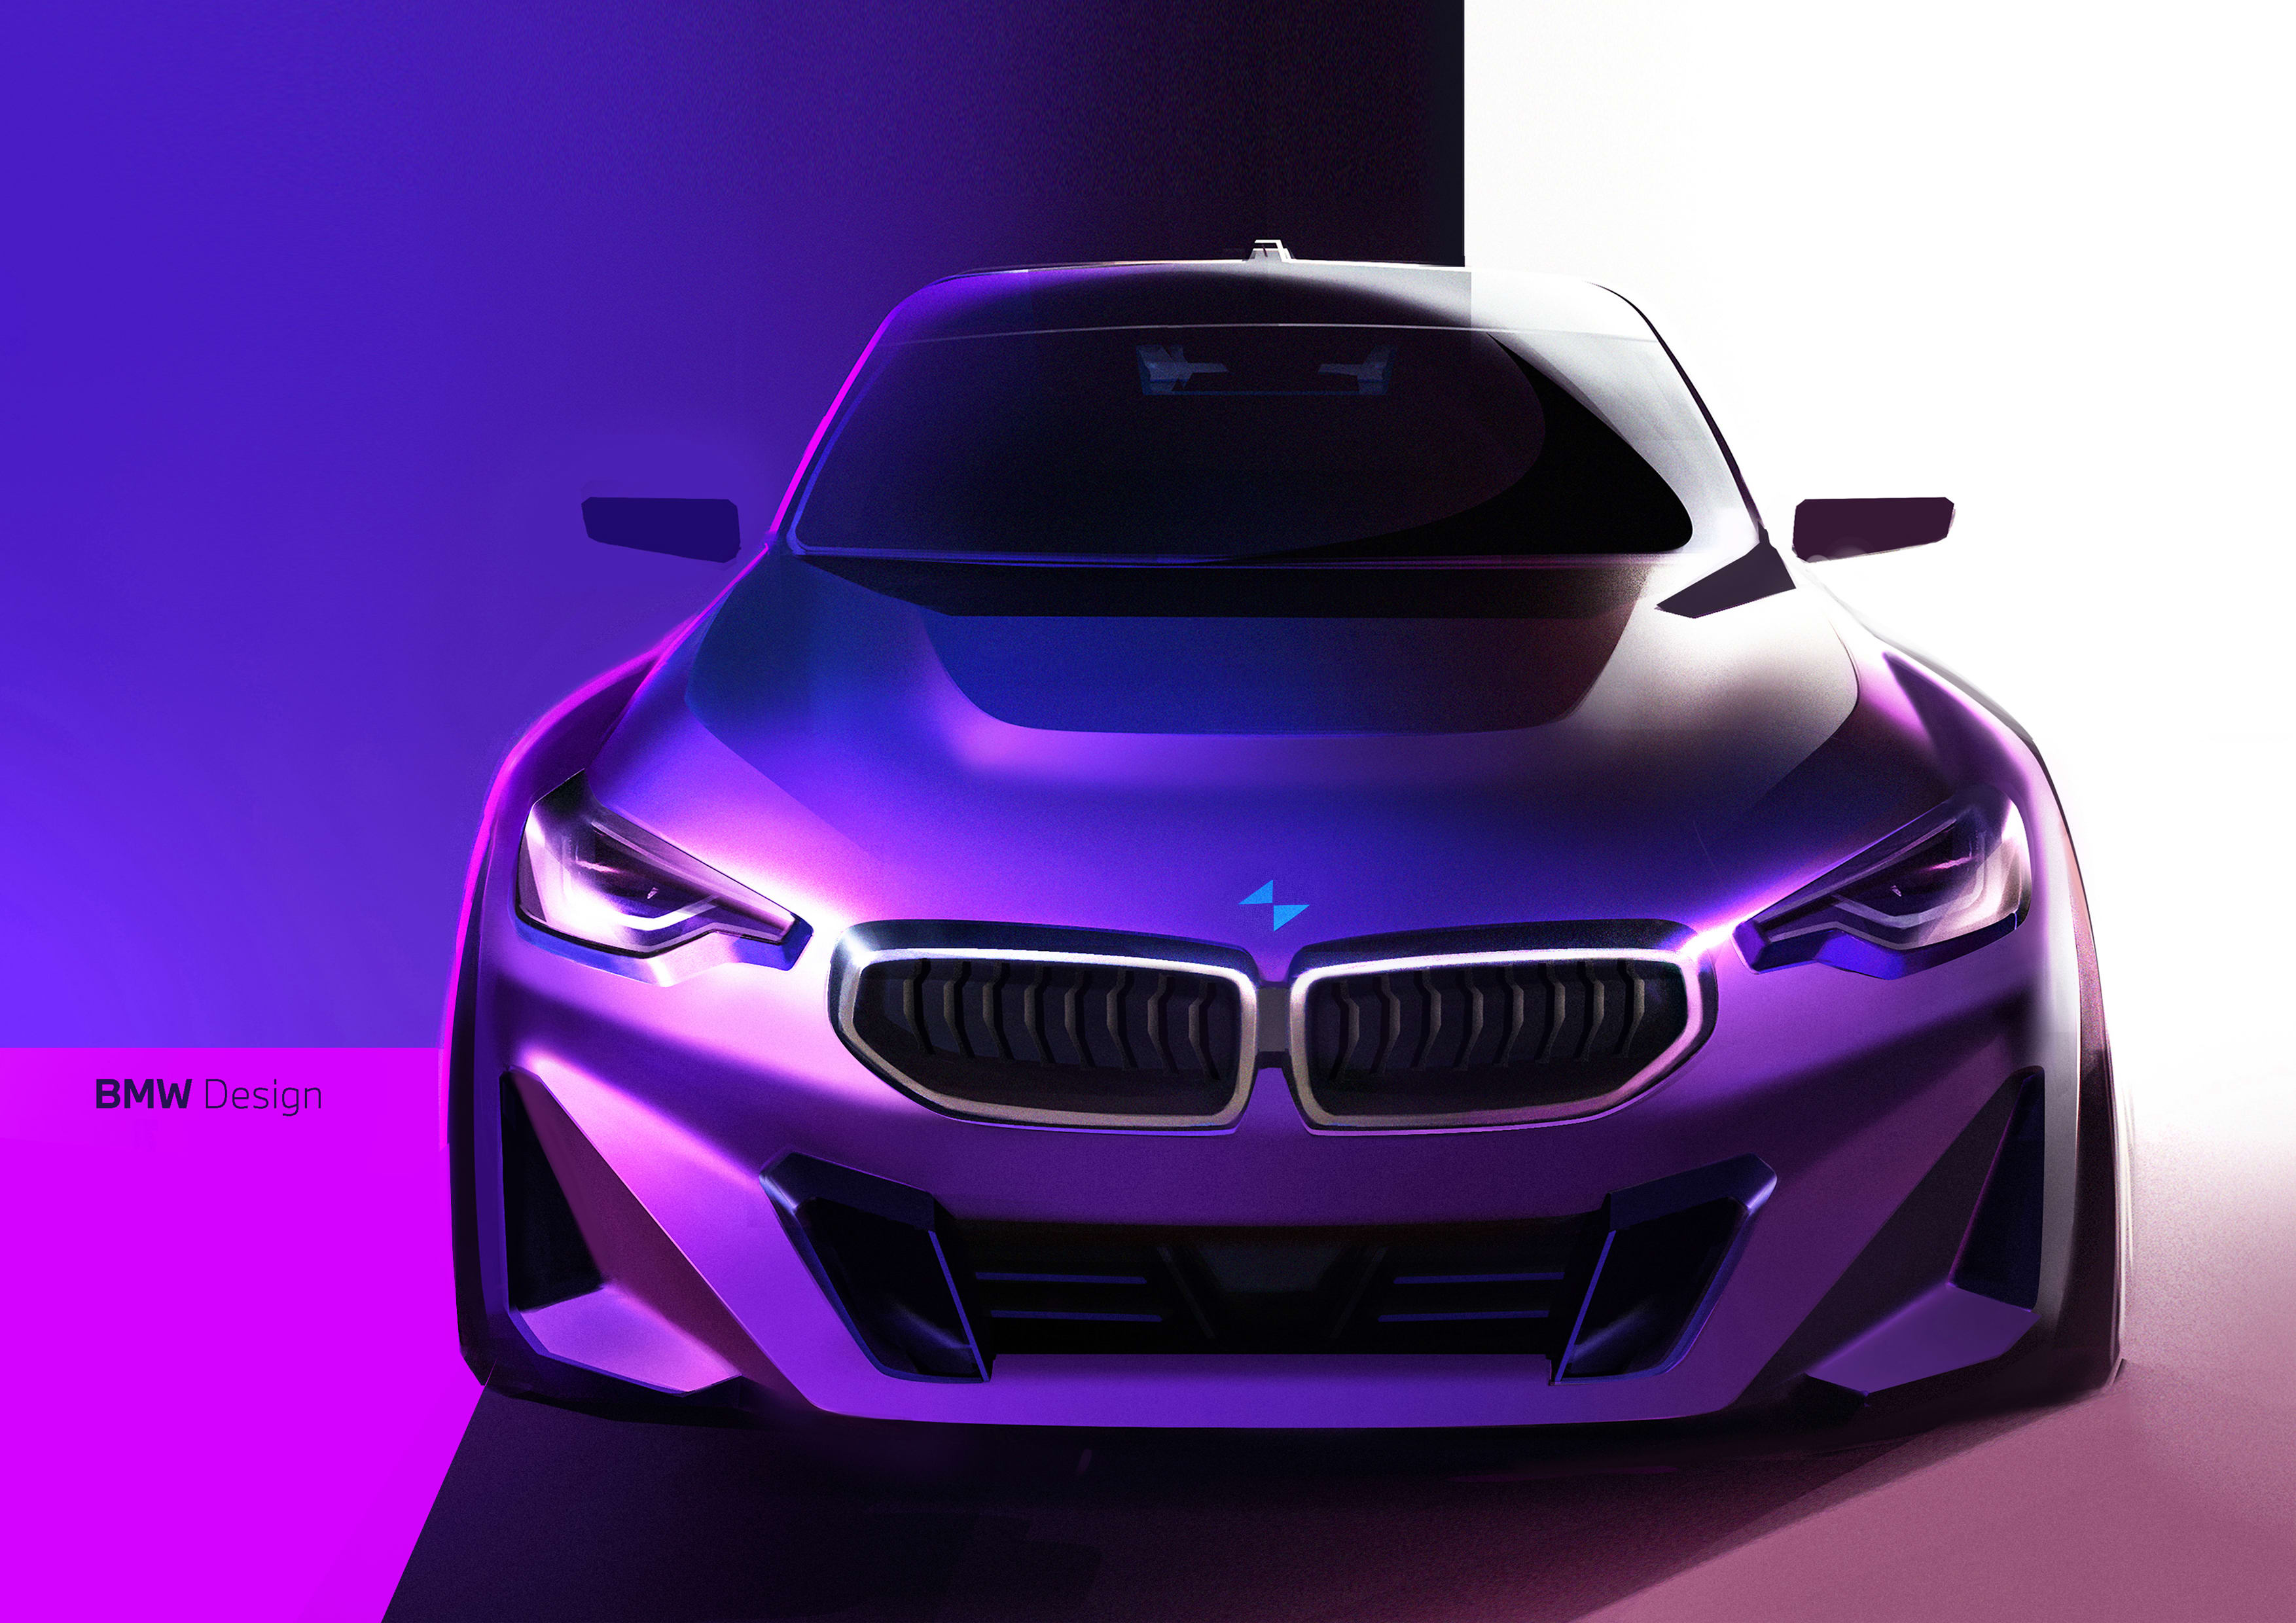 2022 BMW 2 Series design sketches tease new M2's aggressive styling